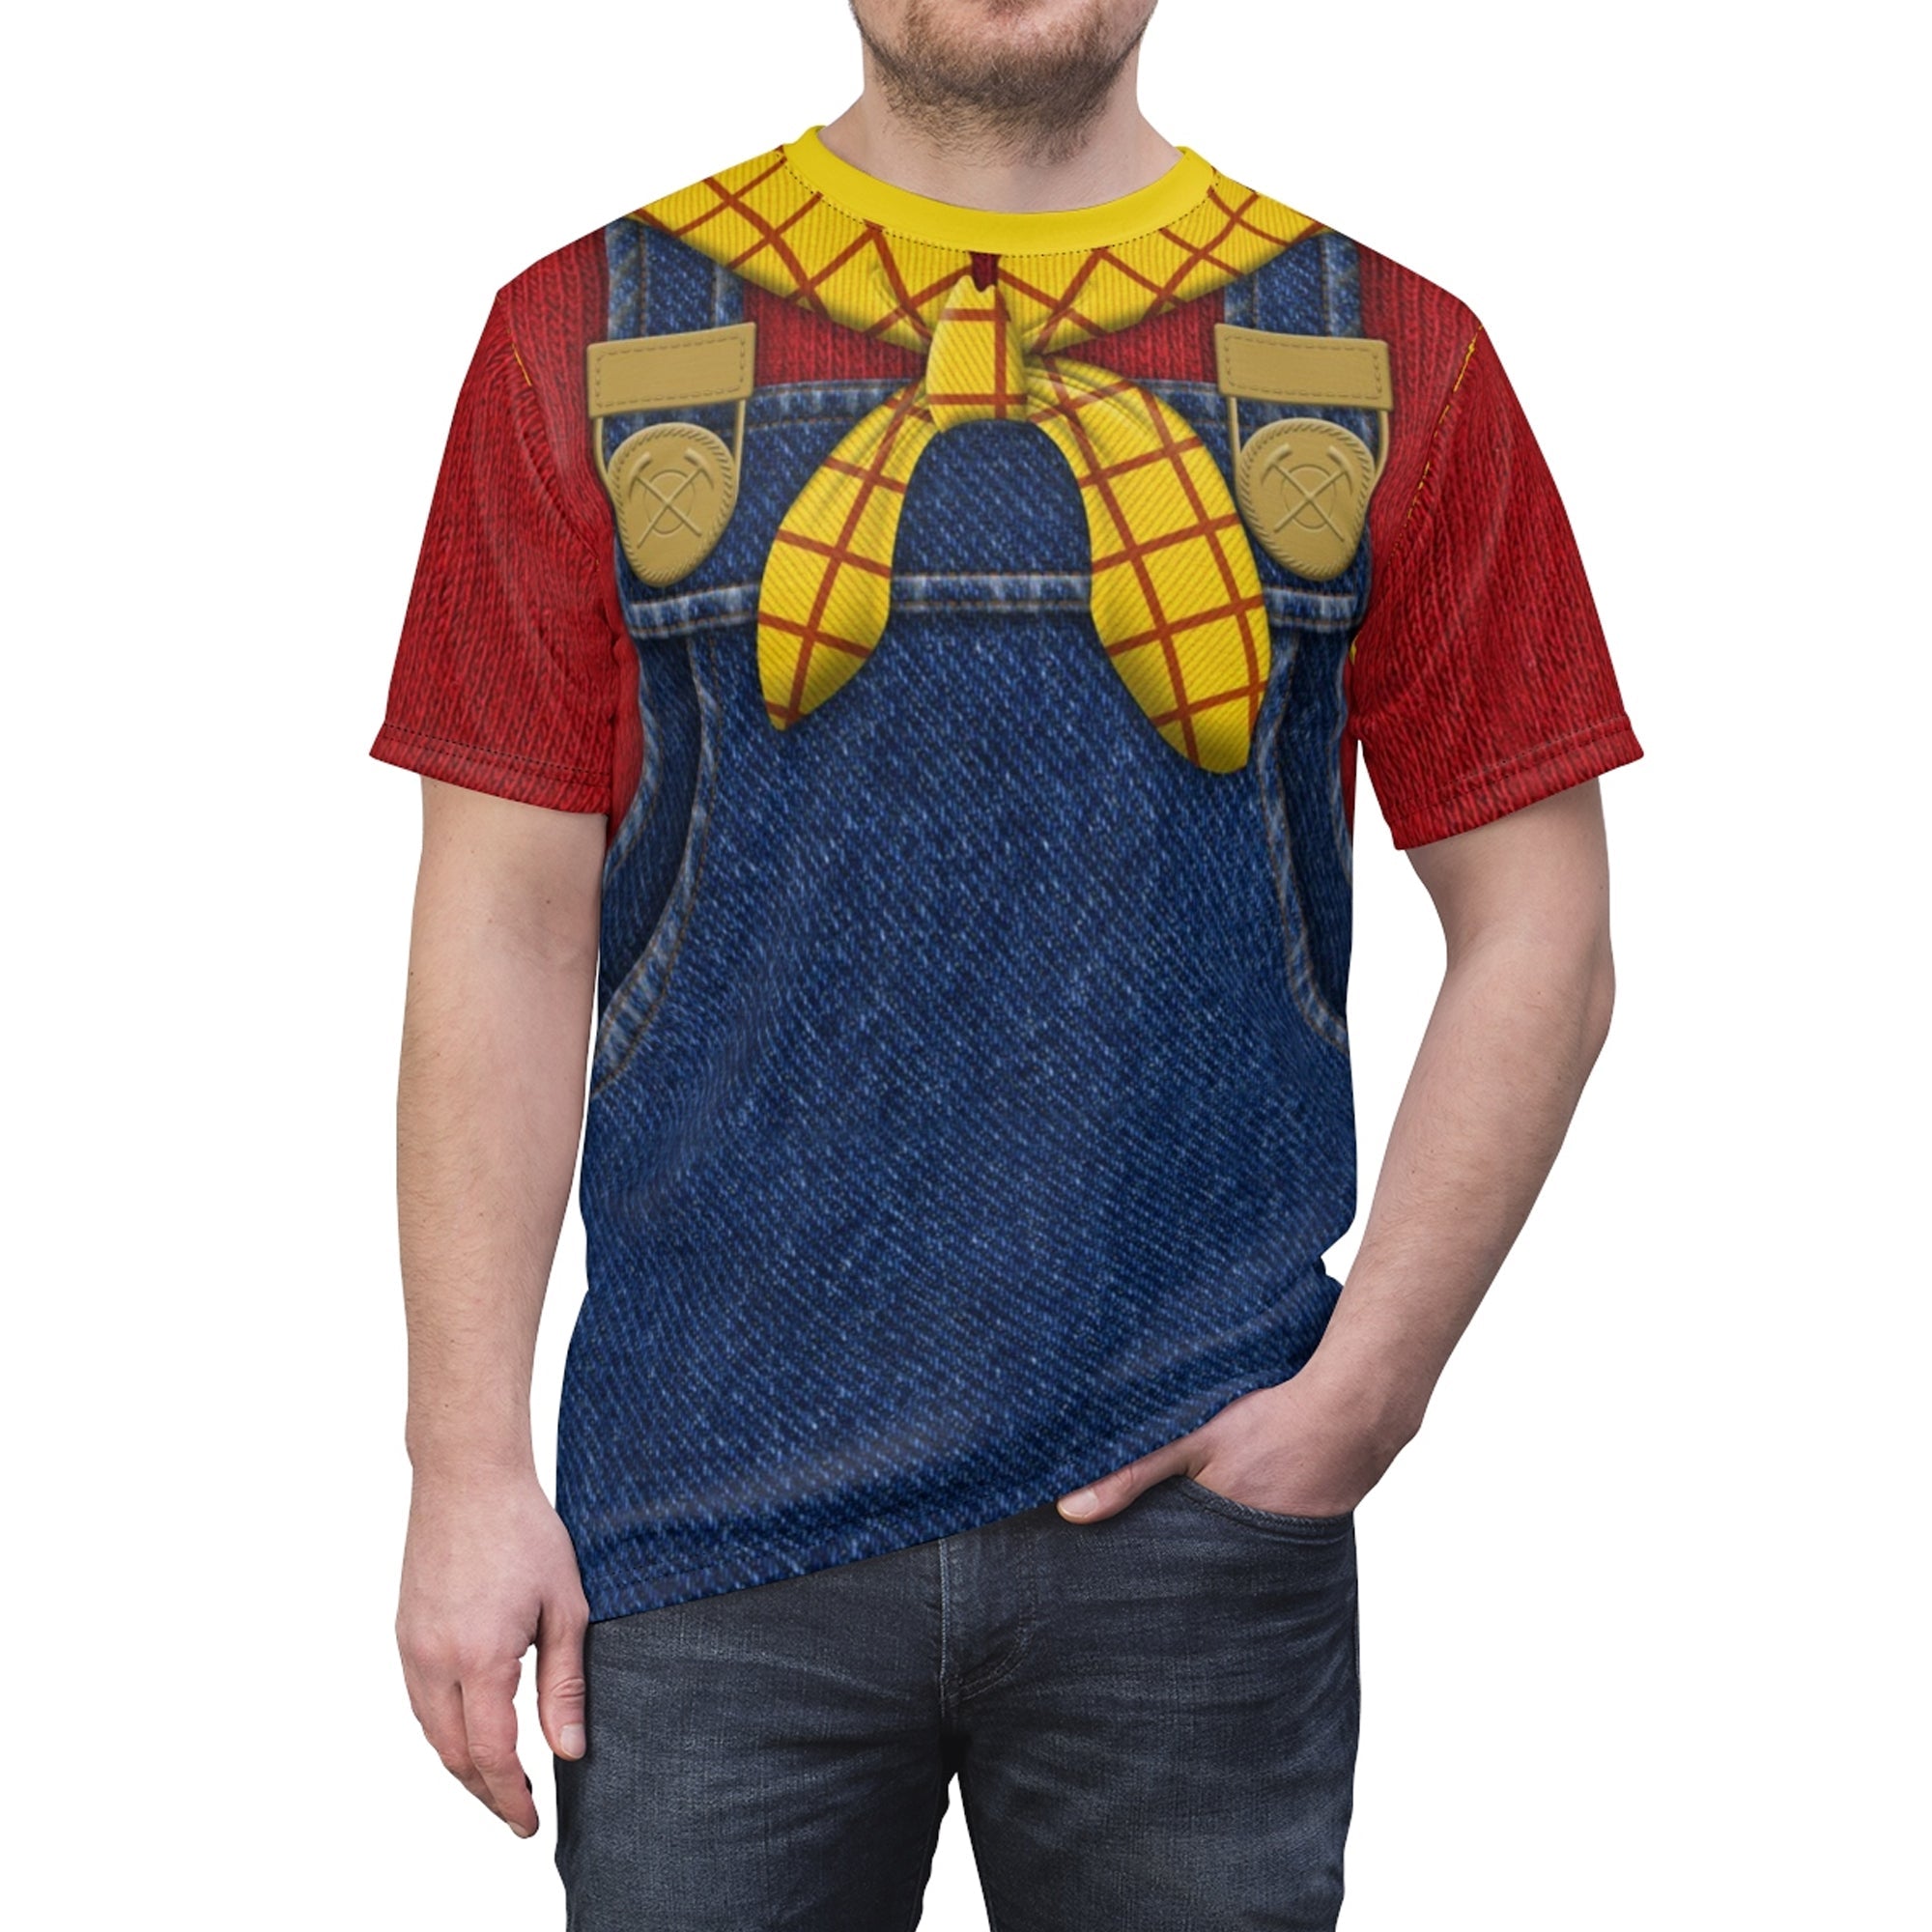 Stinky Pete Toy Story Costume T-Shirt